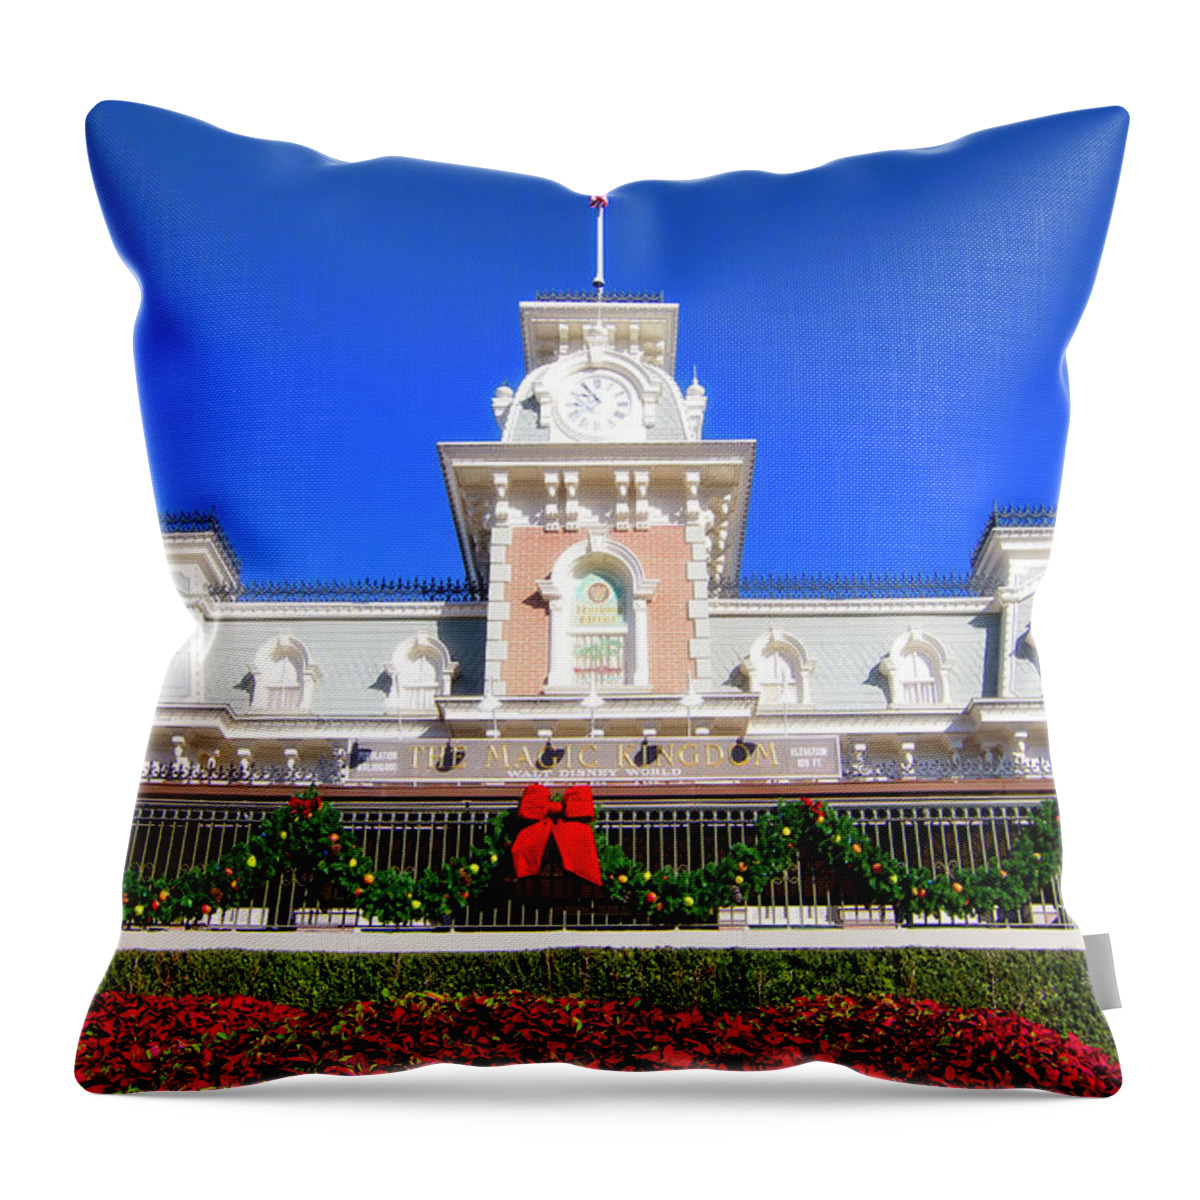 Magic Kingdom Throw Pillow featuring the photograph Disney Railroad Station by Mark Andrew Thomas